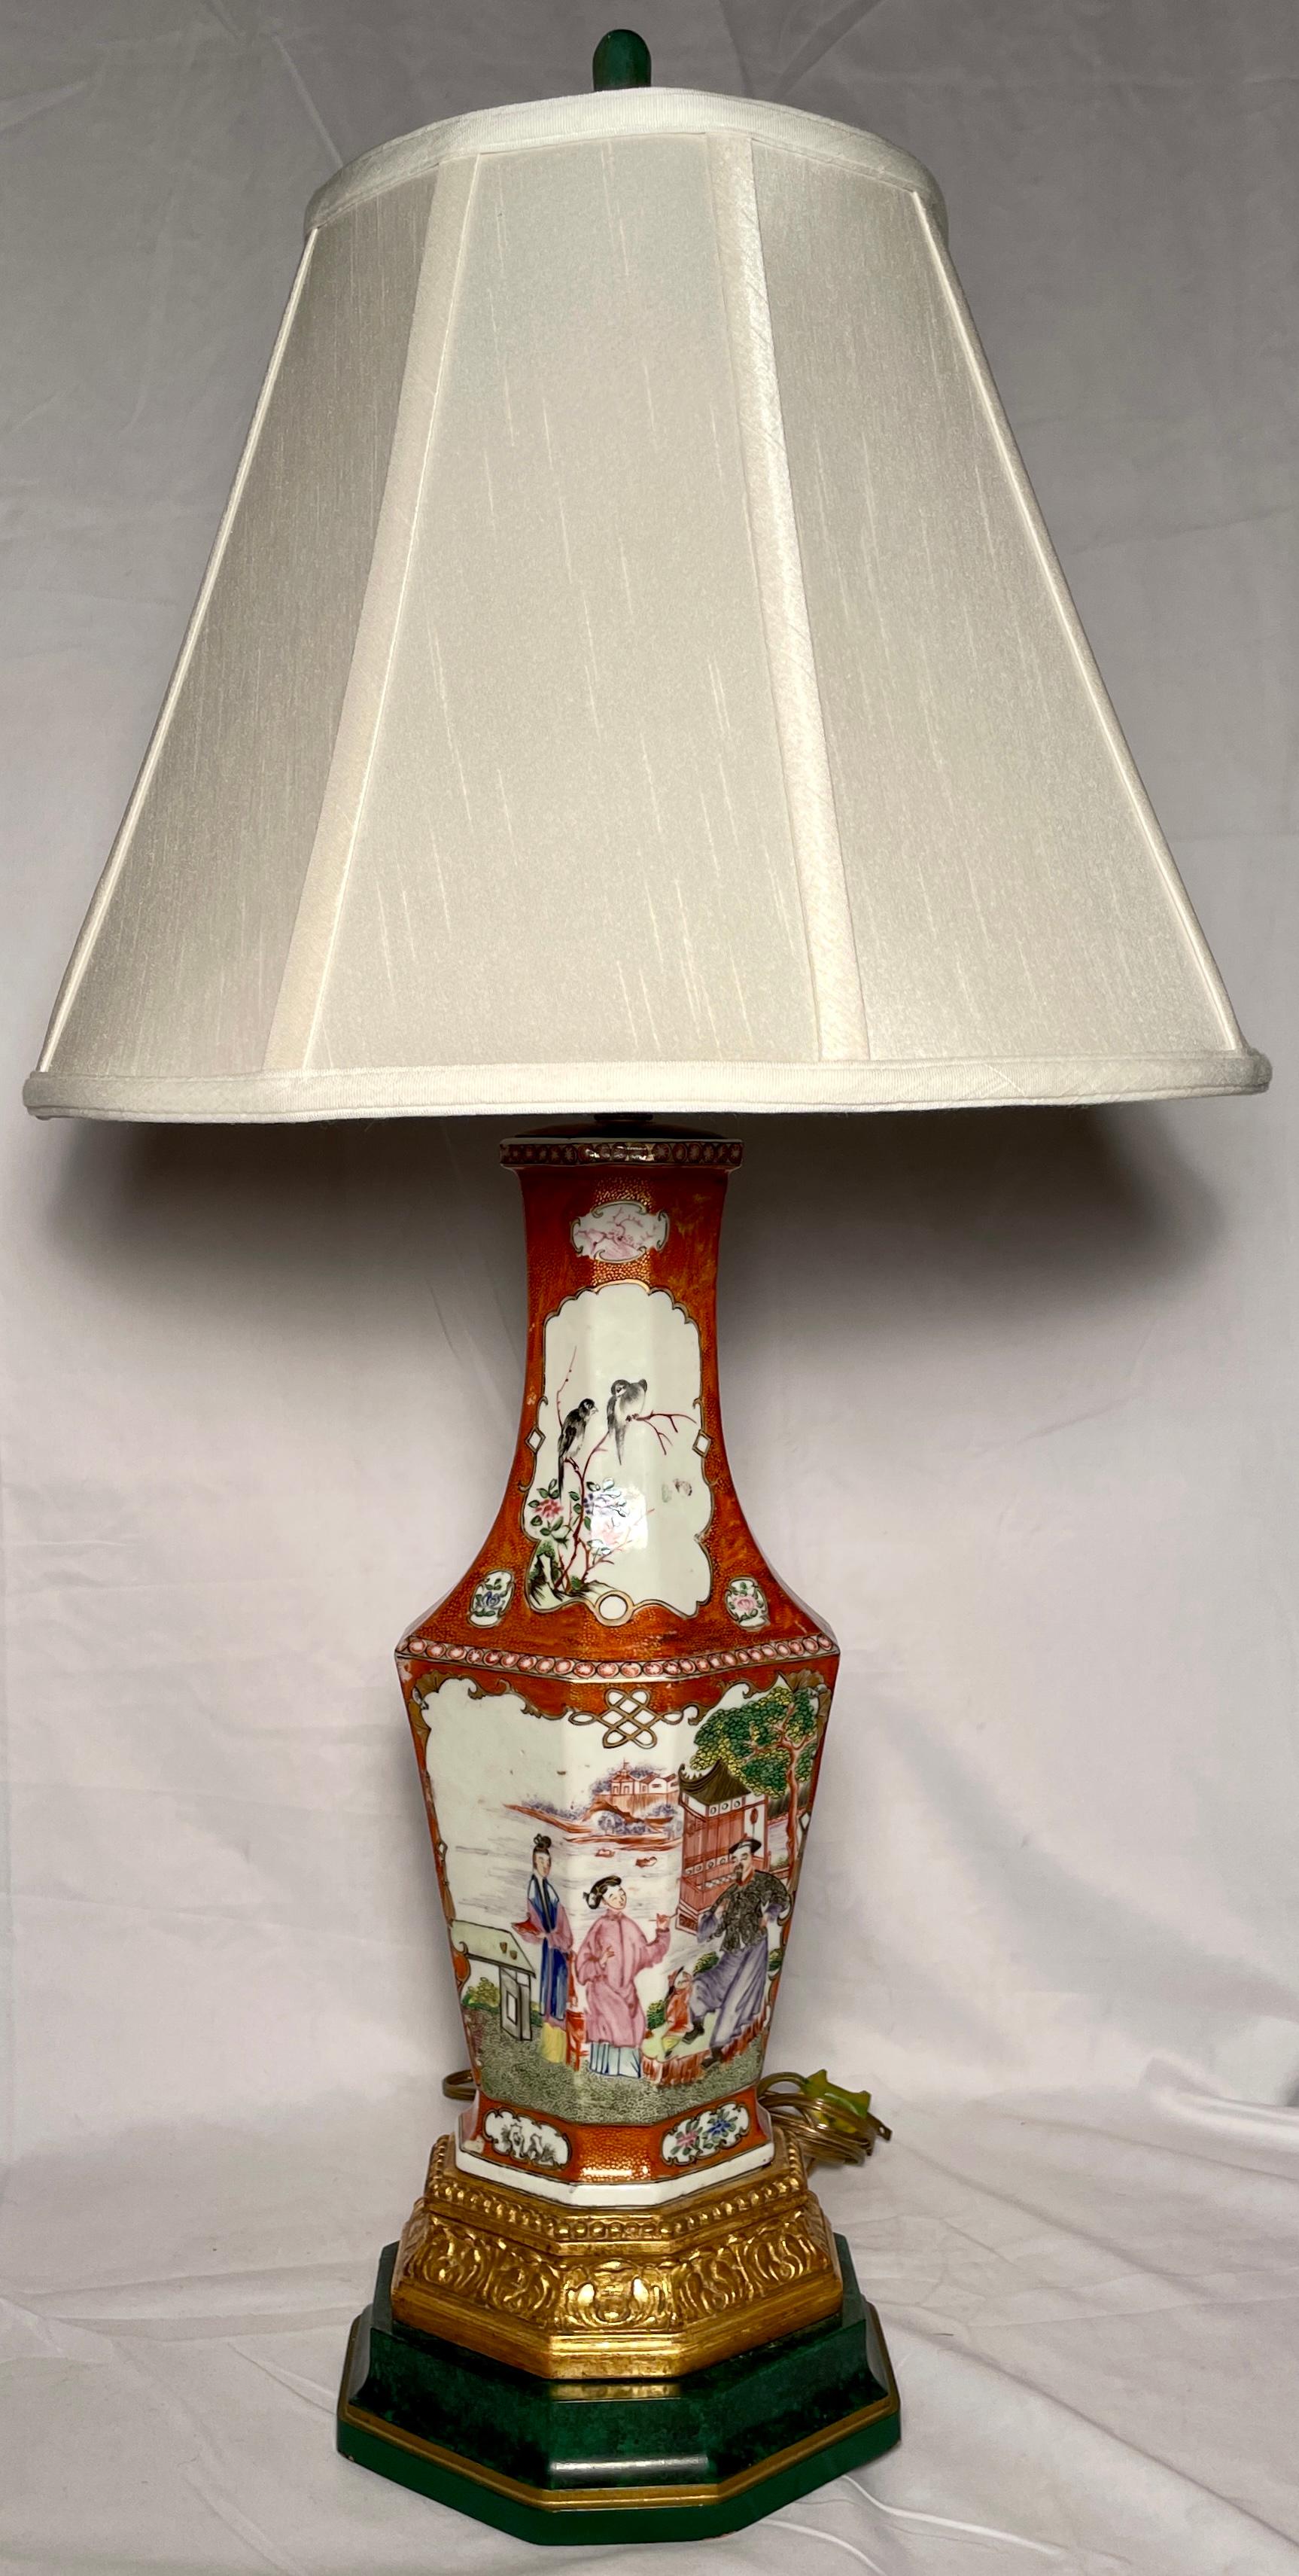 Pair antique Chinese export rust colored porcelain urns made into lamps on hand-made bases.